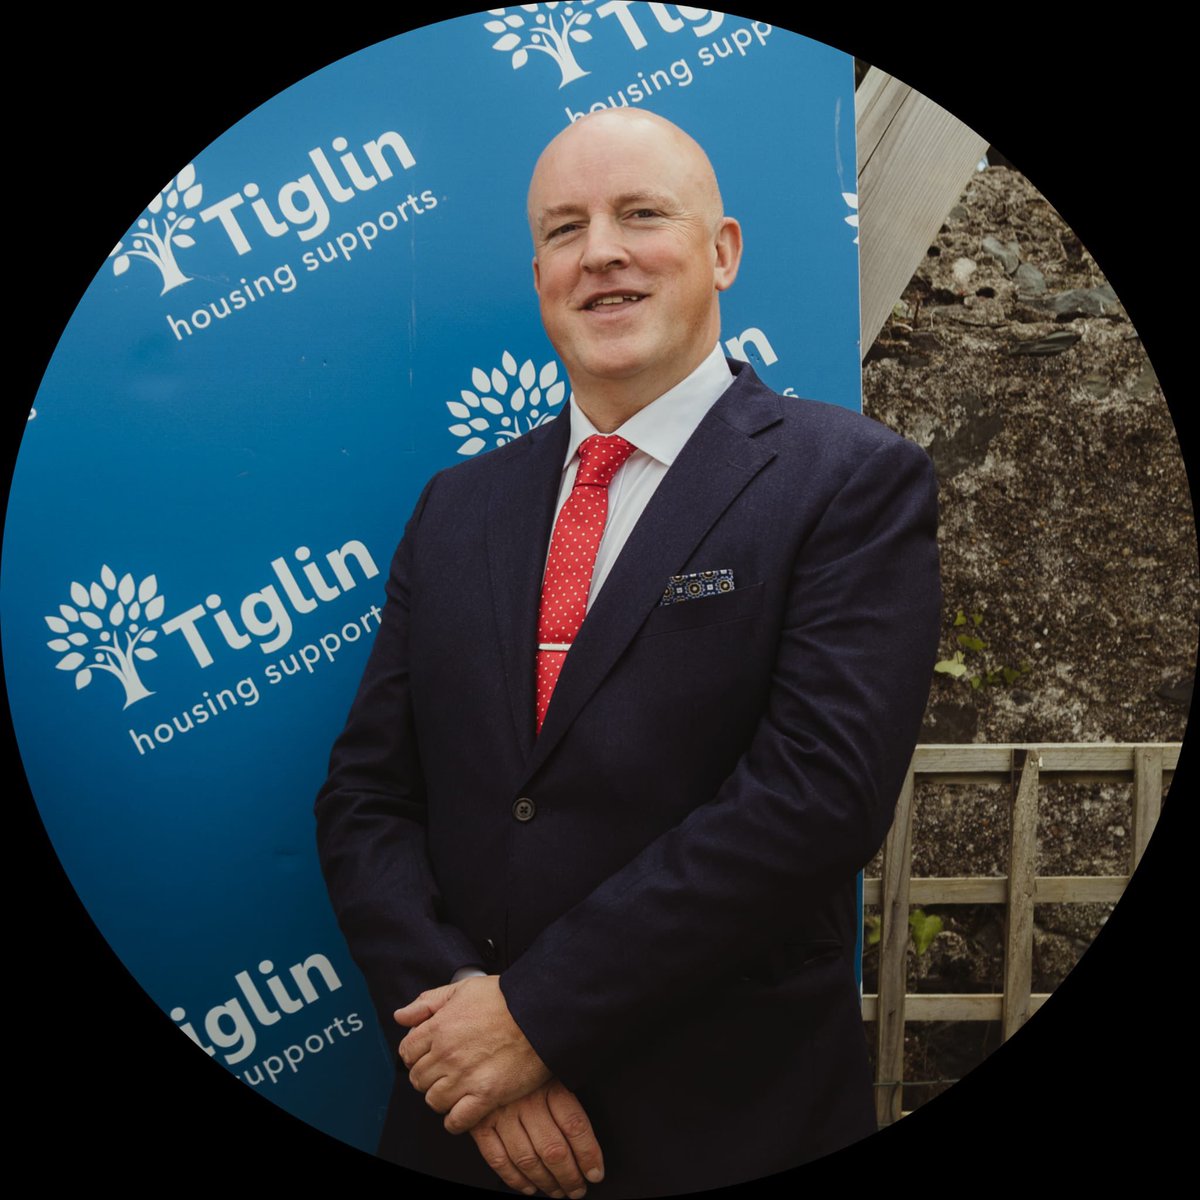 We had a fantastic chat with @carthy_aubrey founder and chairman @TiglinIreland for the podcast. Episode drops on Wednesday 20th of March. 🎤 #addictionsrecovery #lighthouse #purpose #homelessnessservices 🙏